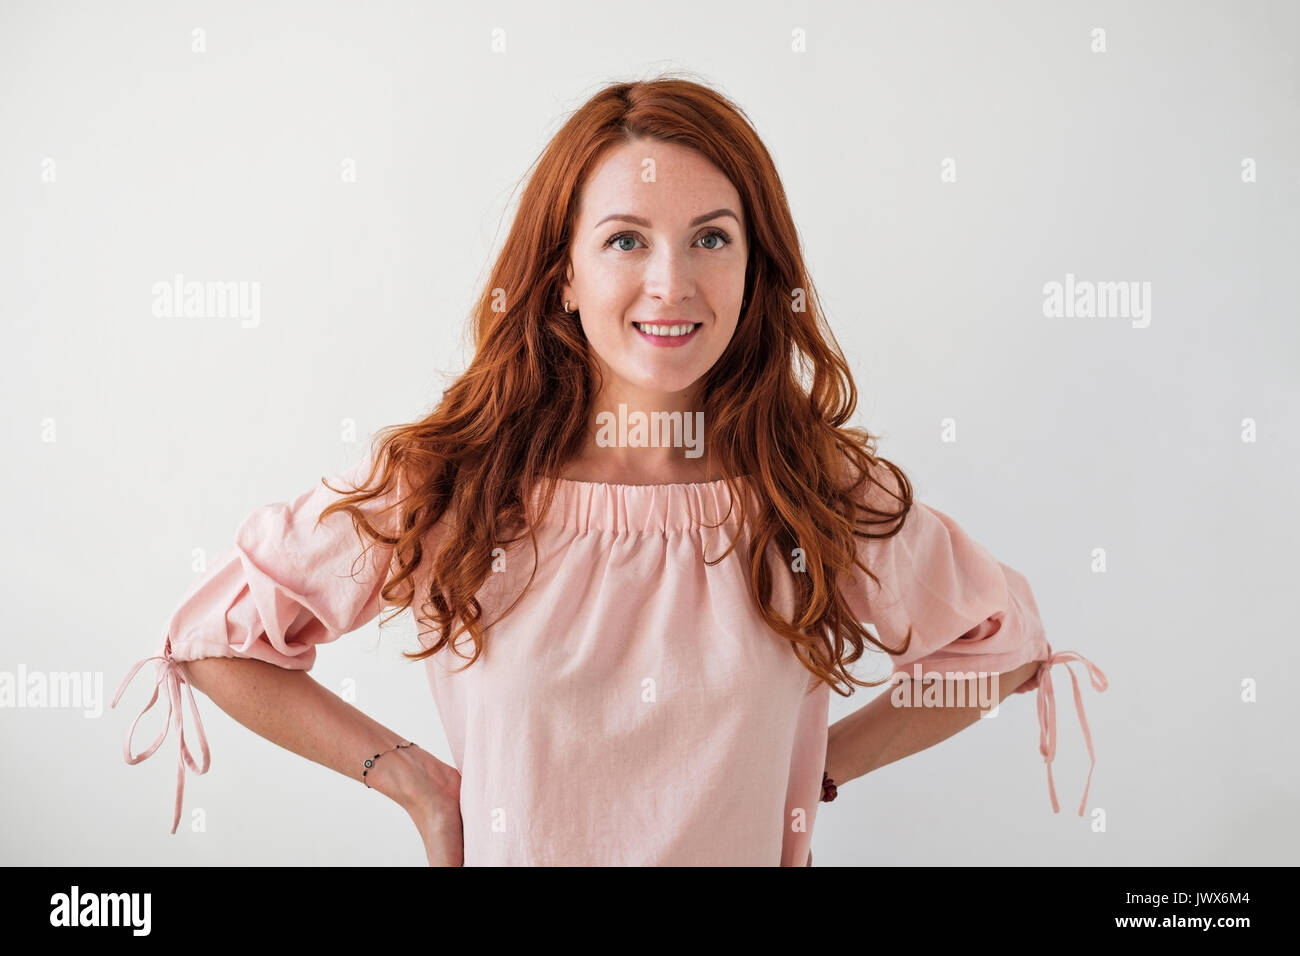 Caucasian woman model with ginger hair posing indoors Stock Photo